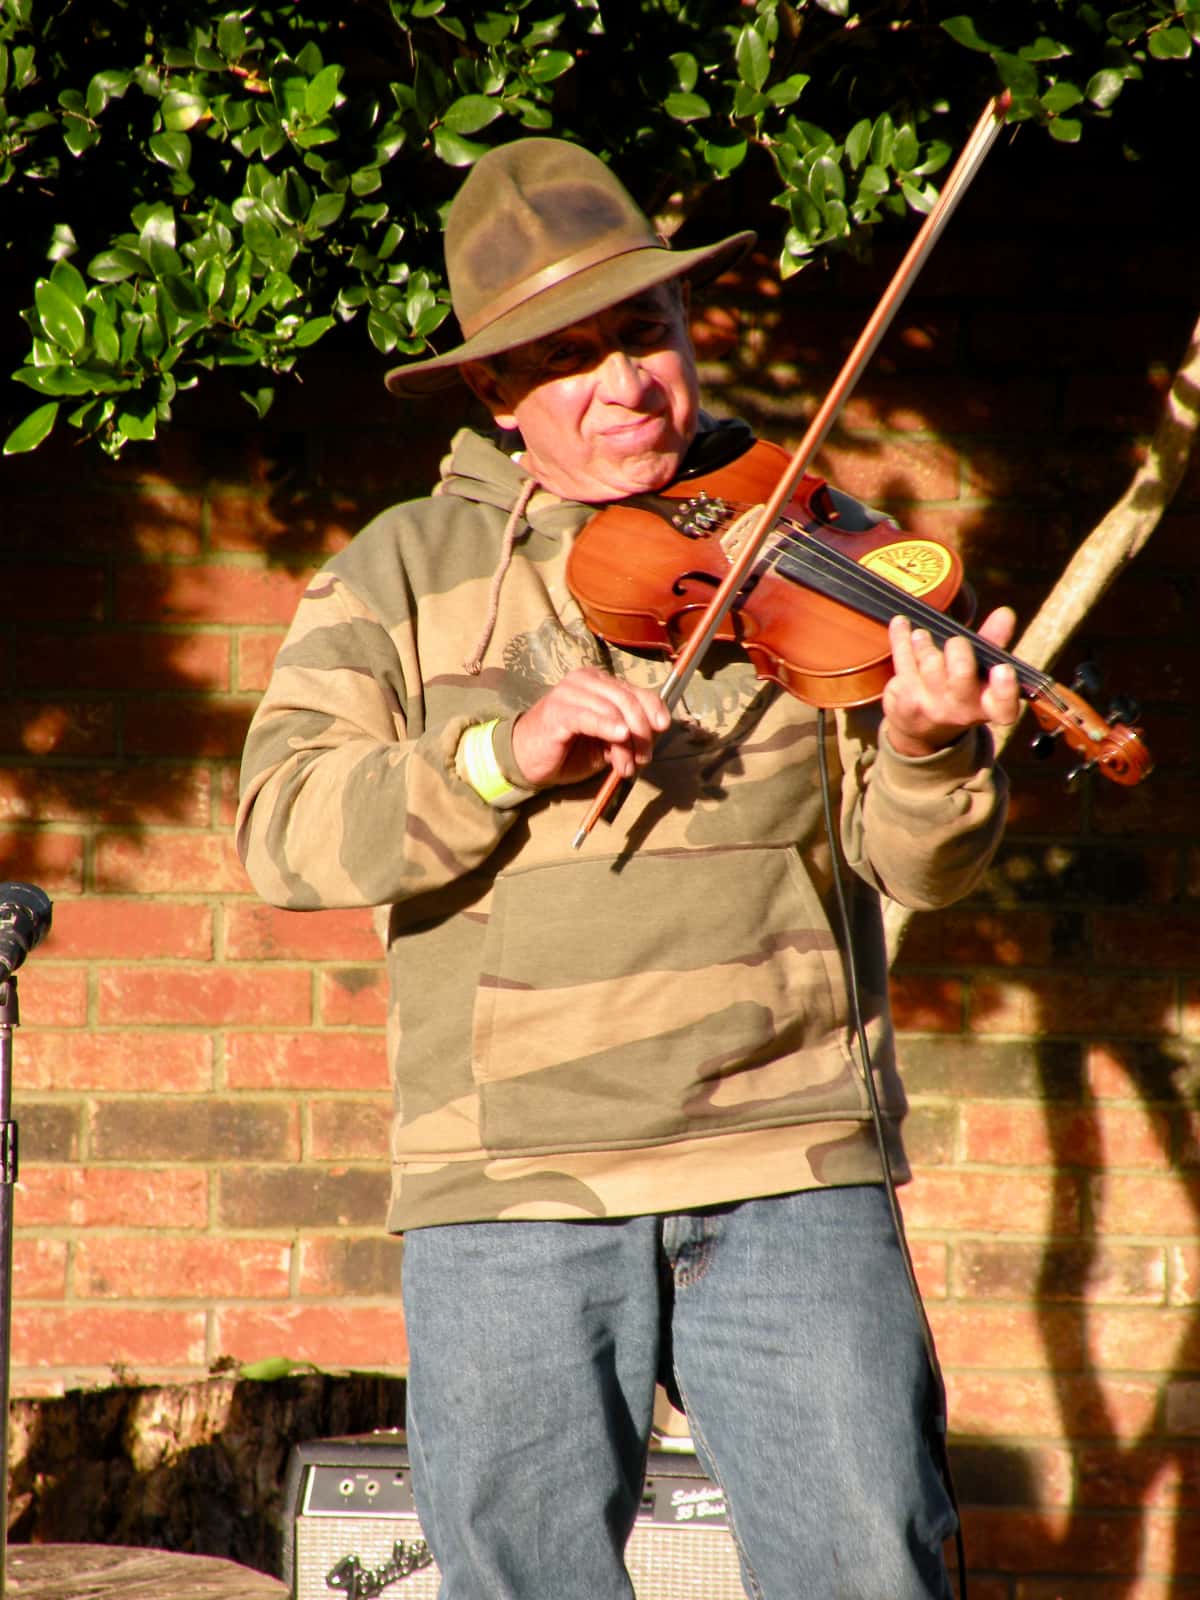 Man with green hat and sweater playing fiddle